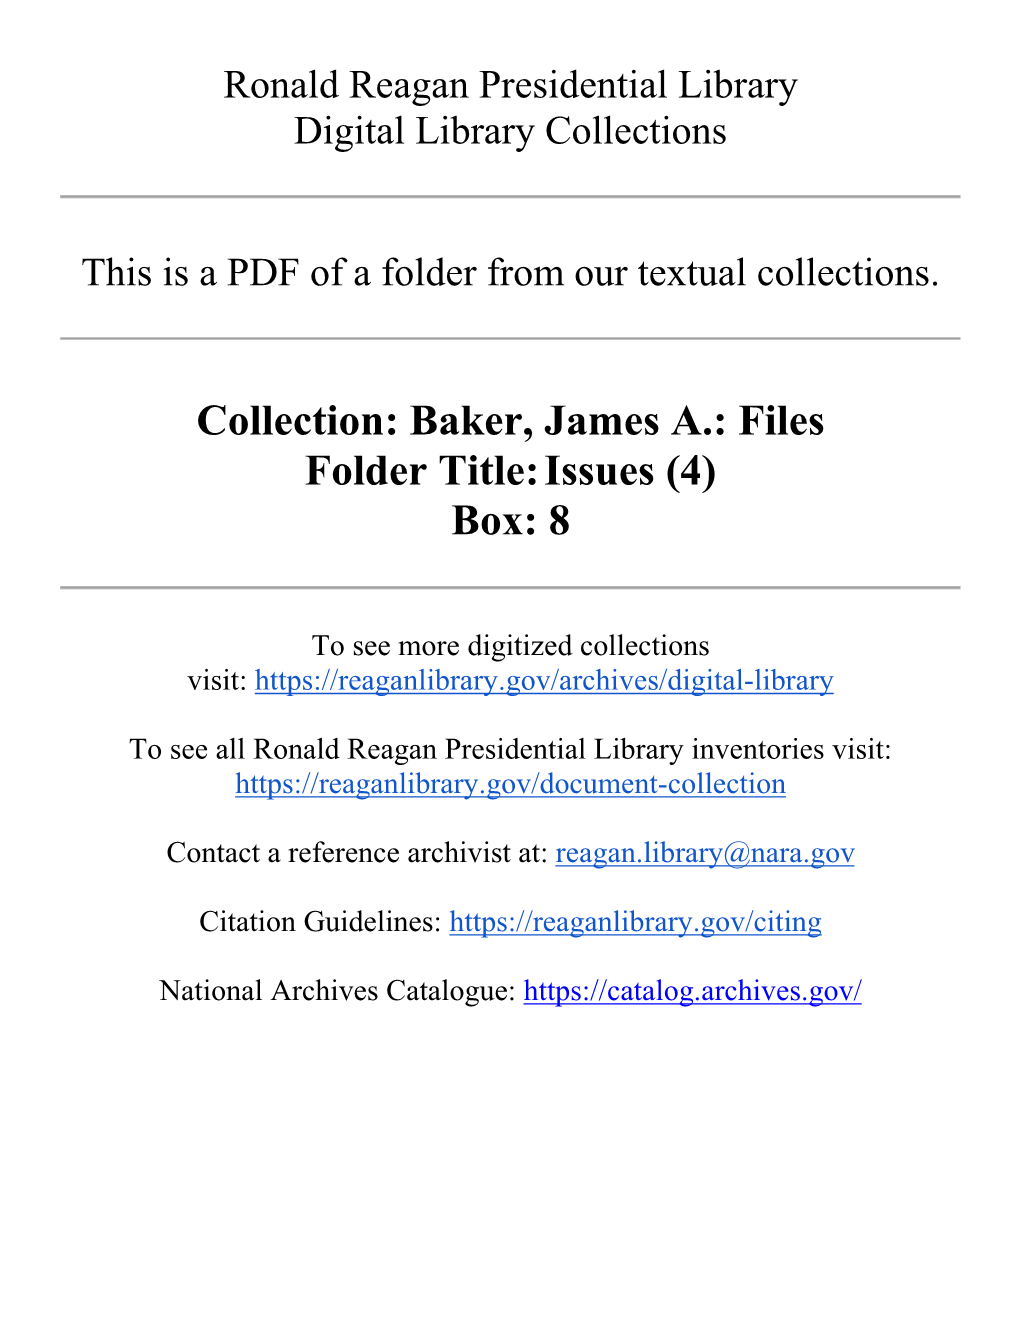 Collection: Baker, James A.: Files Folder Title:Issues (4) Box: 8